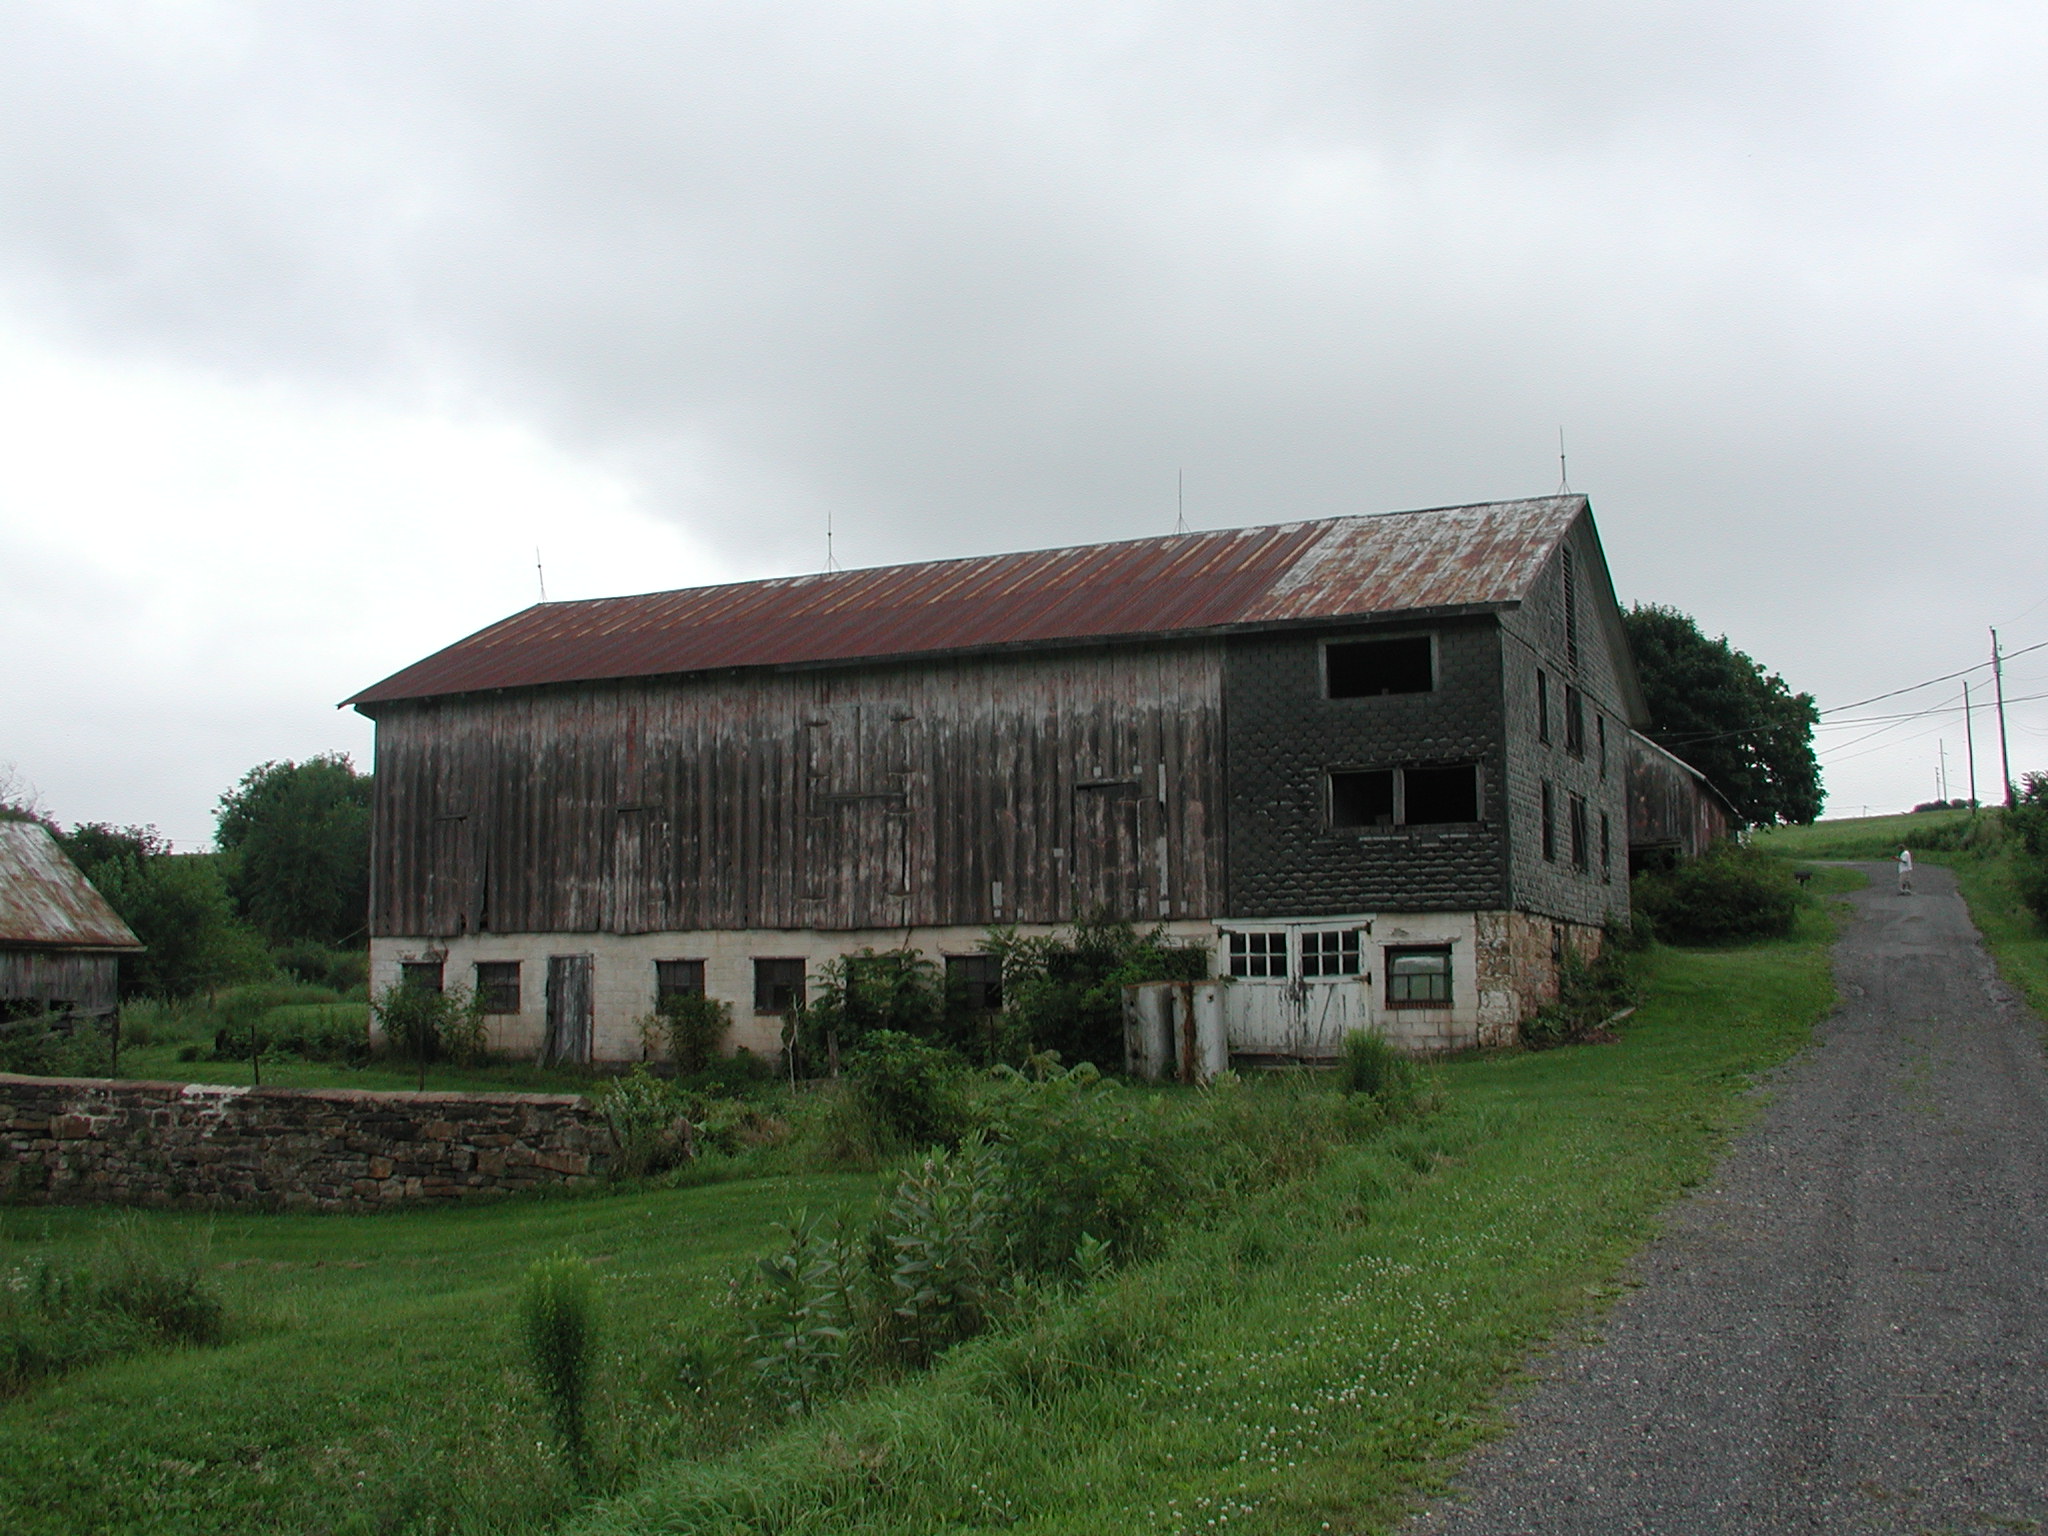 003 PA Barn w forebay enclosed on eaves side, Northumberland County.JPG